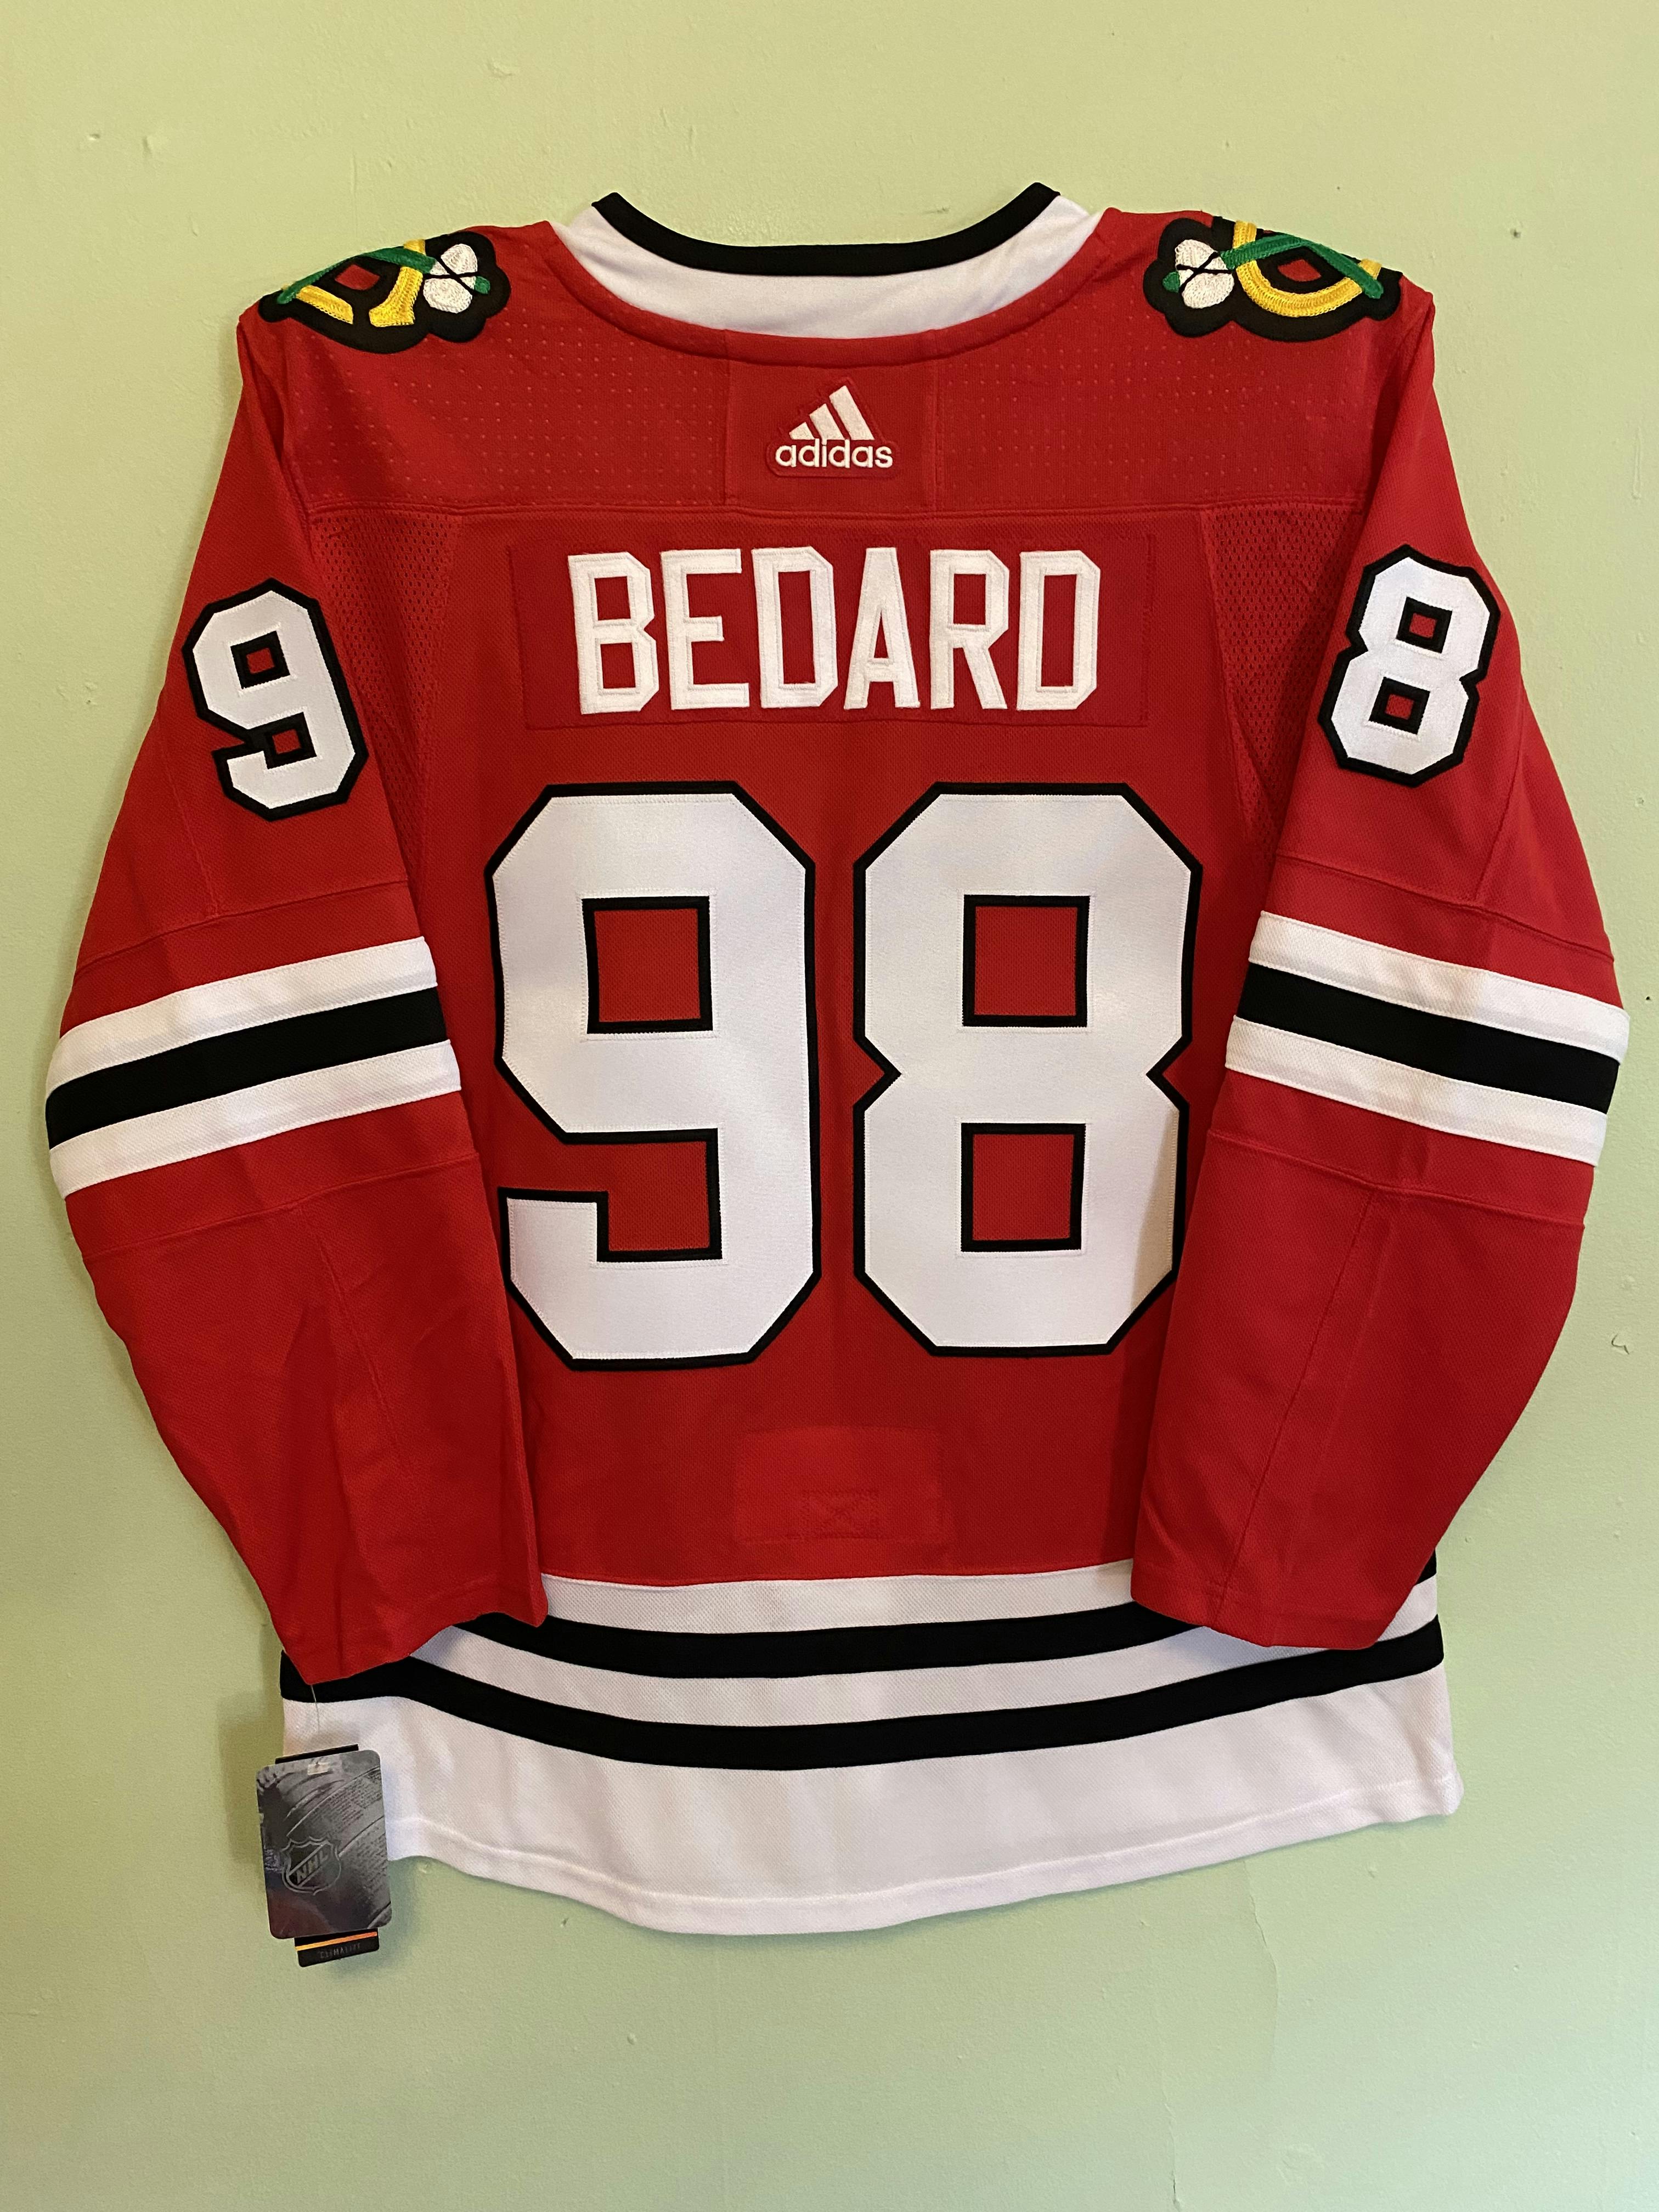 Large Connor Bedard #98 Chicago Blackhawks Adidas NHL home Jersey 52 NEW  w/TAGS